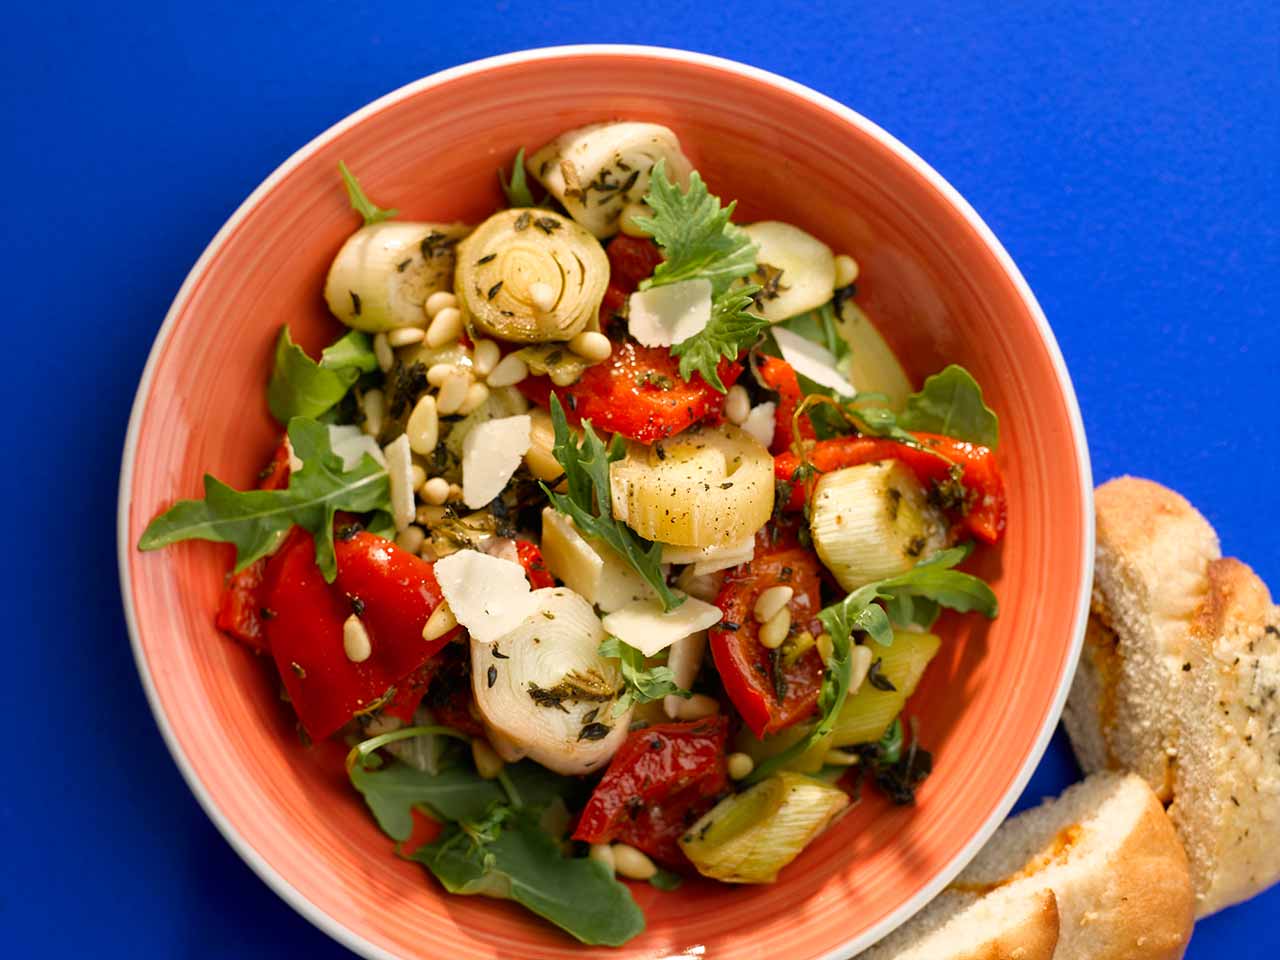 Balsamic salad of roasted leek and red pepper 